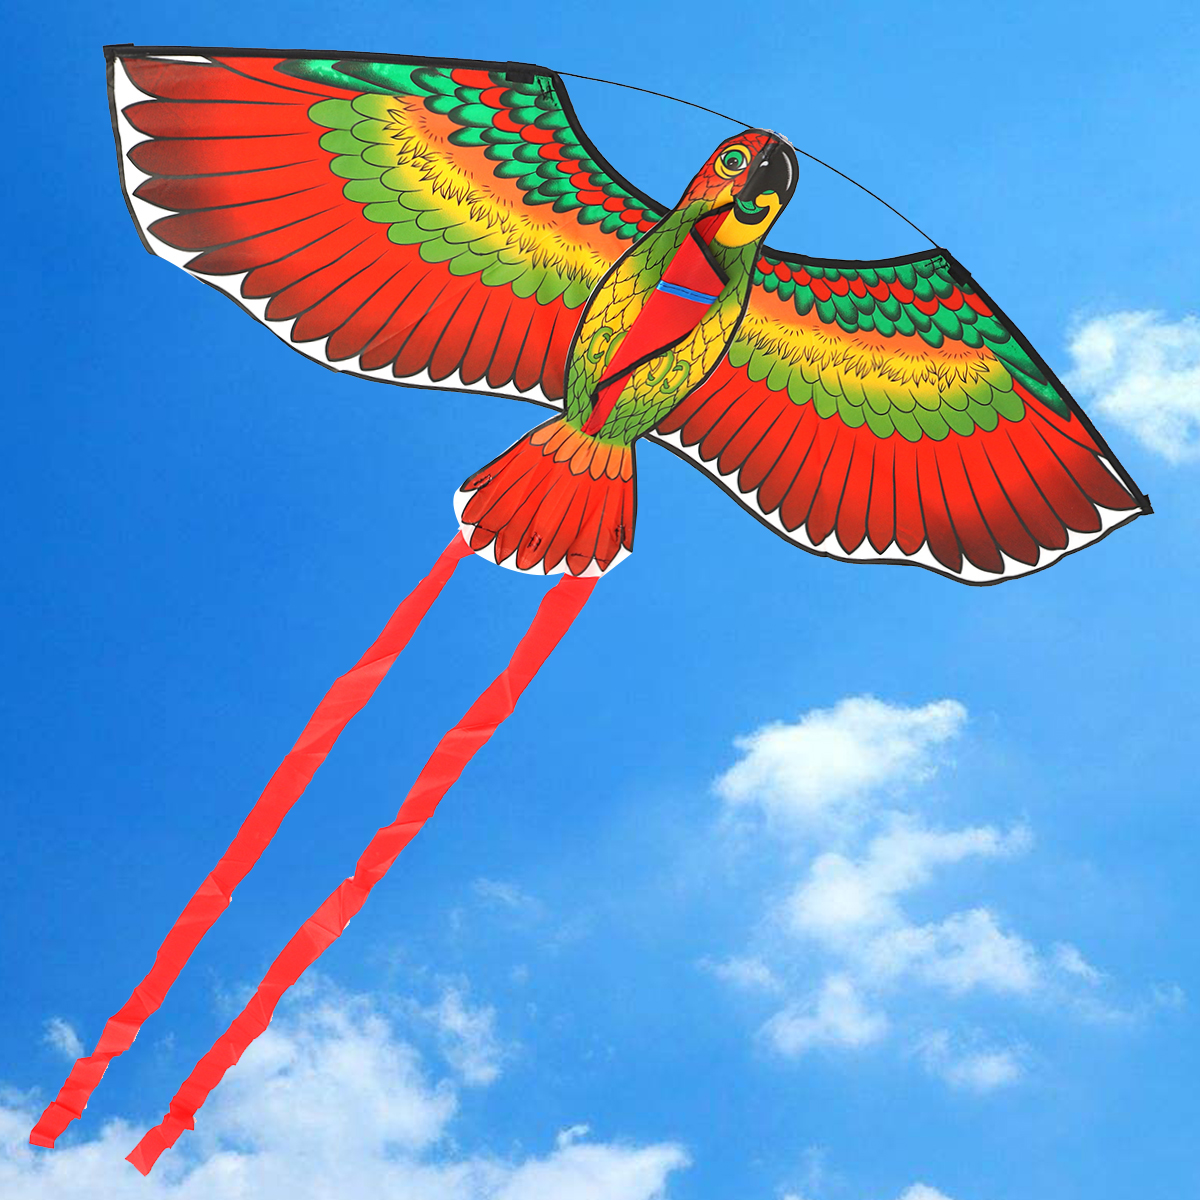 Outdoor-Beach-Park-Polyester-Camping-Flying-Kite-Bird-Parrot-Steady-With-String-Spool-For-Adults-Kid-1347624-7